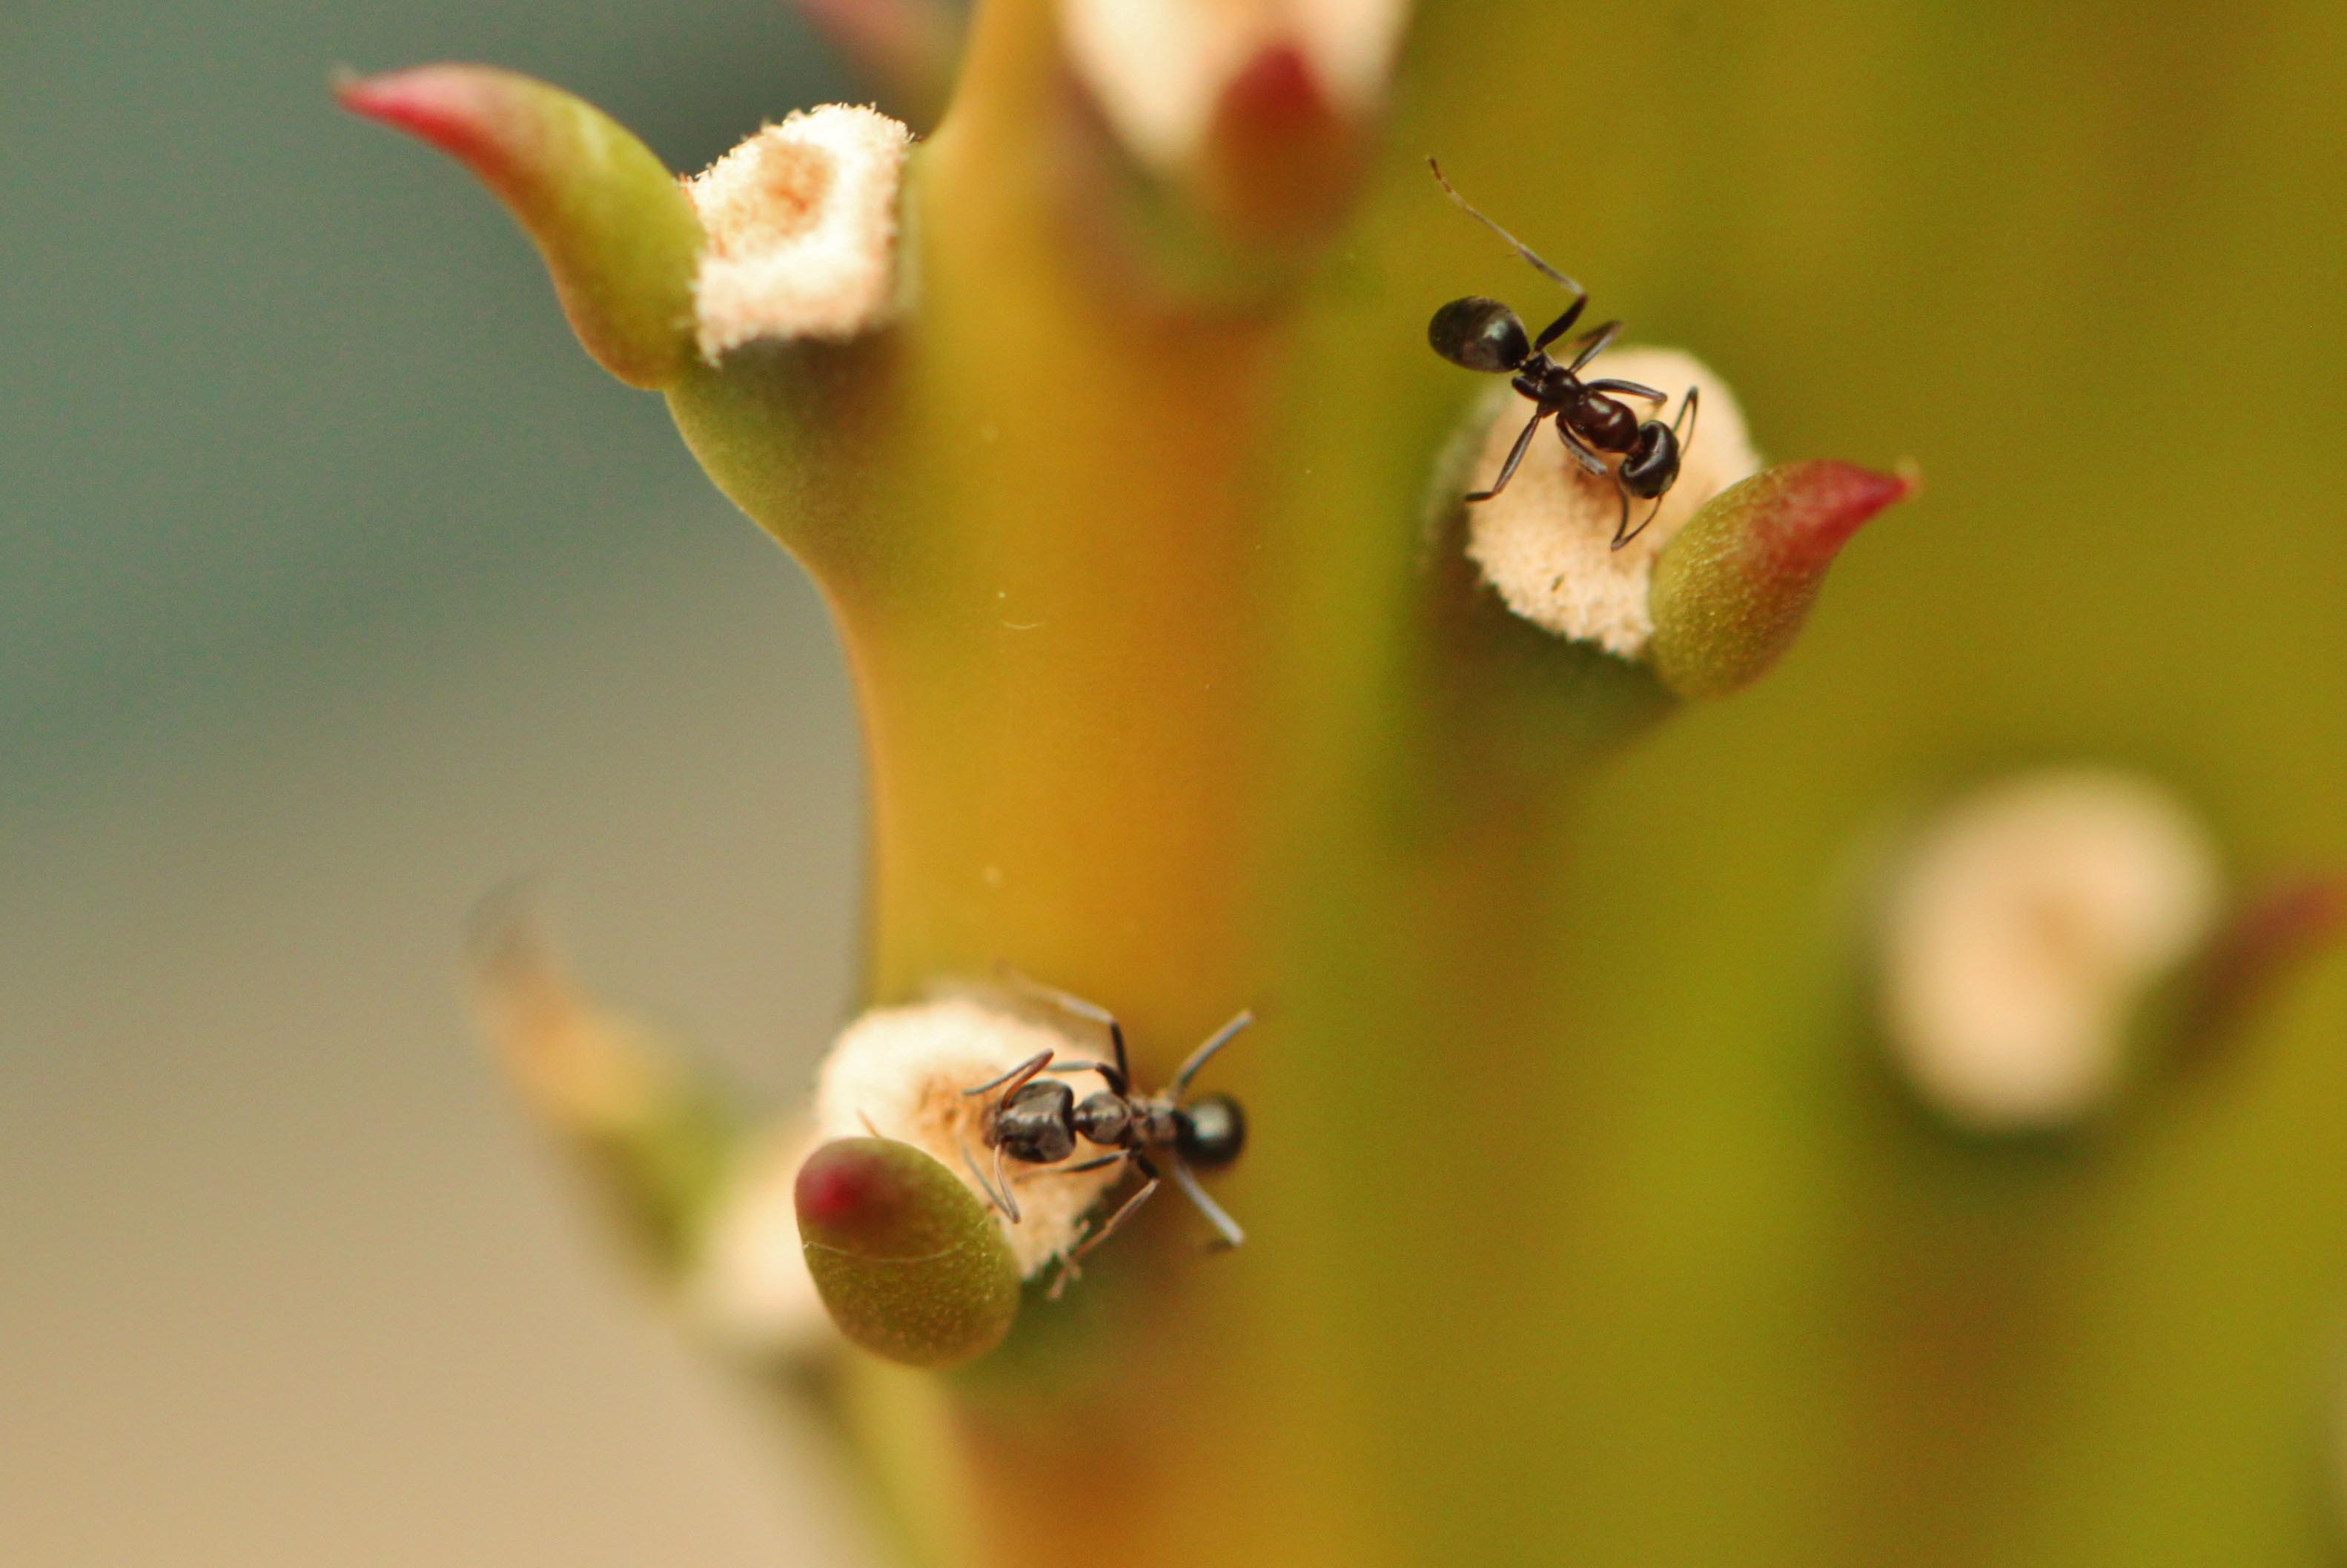 Ants on a Cactus